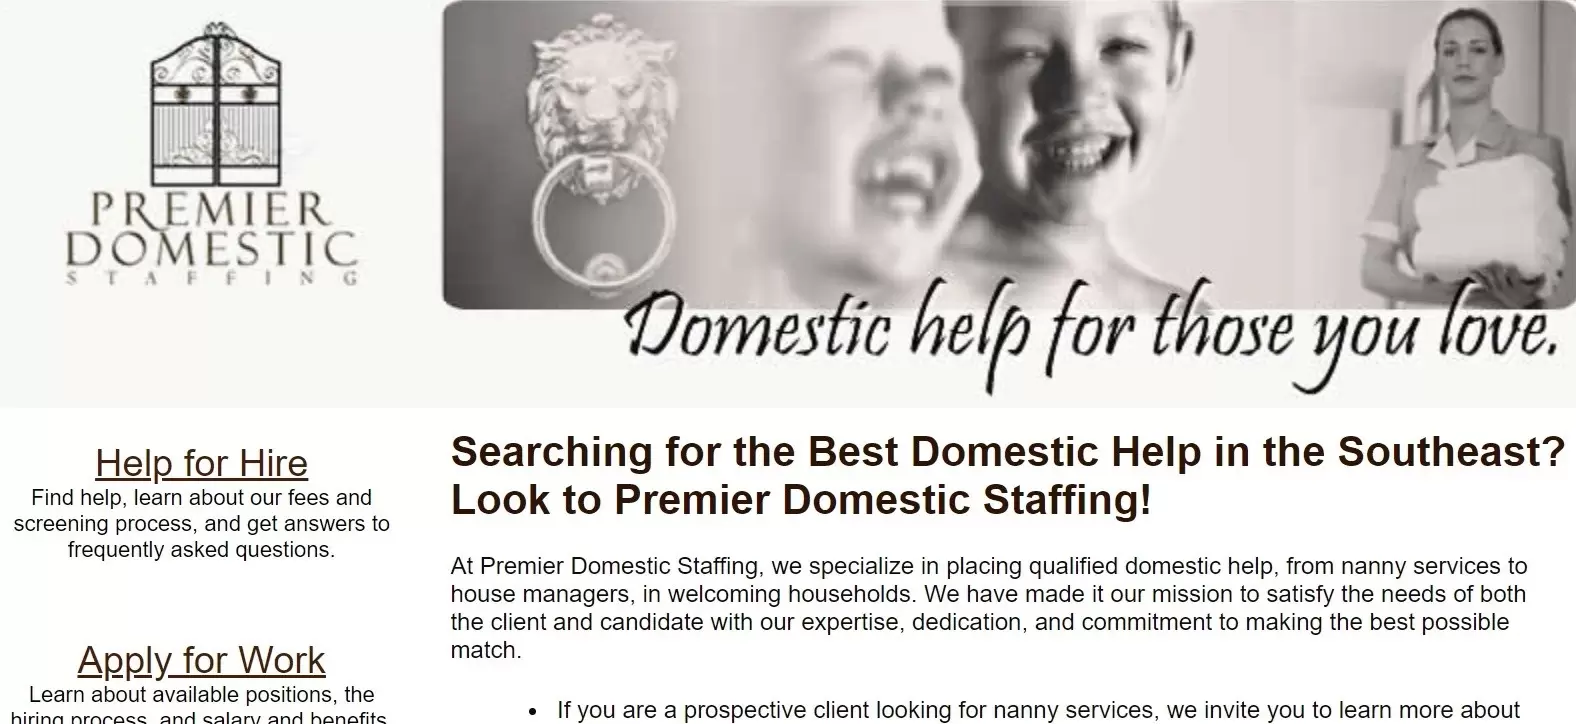 Premier Domestic Staffing company profile and reviews